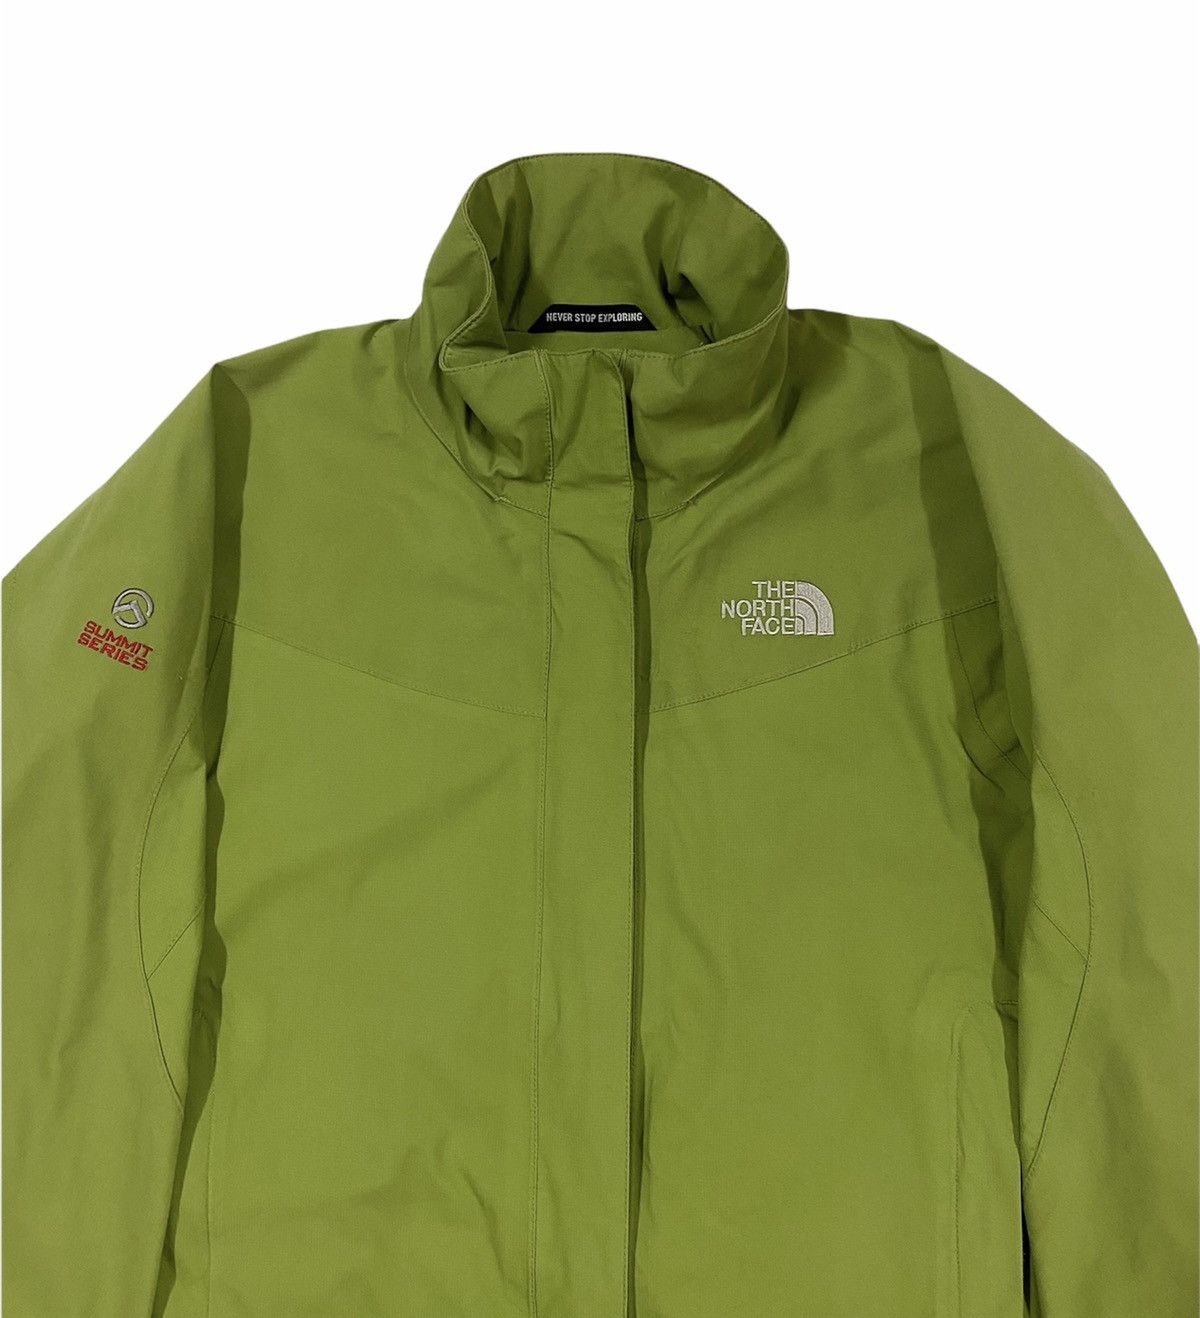 The North Face Vintage Gore Tex XCR Summit Series Jacket S - 4